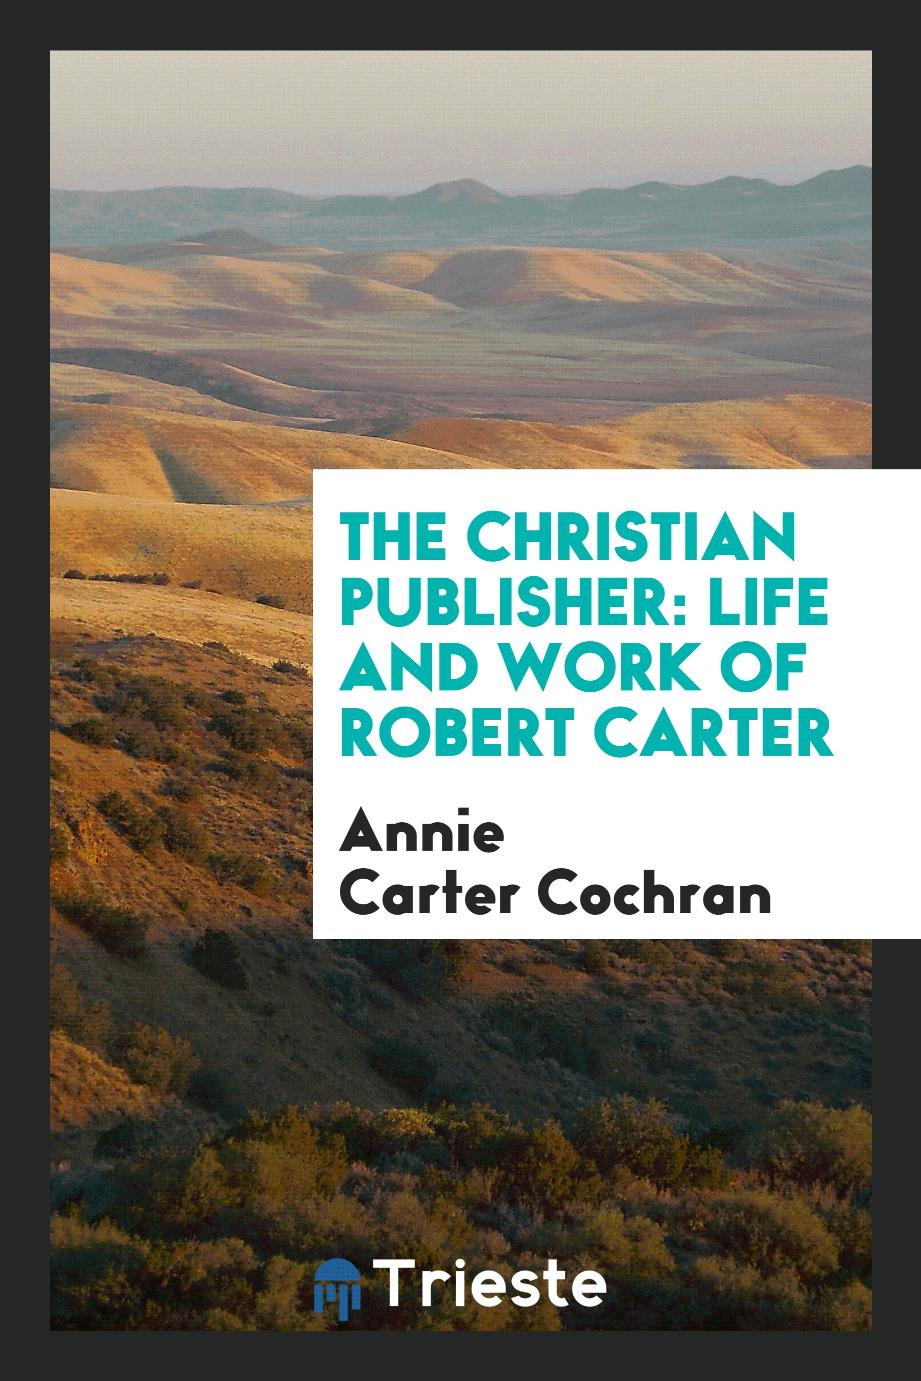 The Christian publisher: life and work of Robert Carter